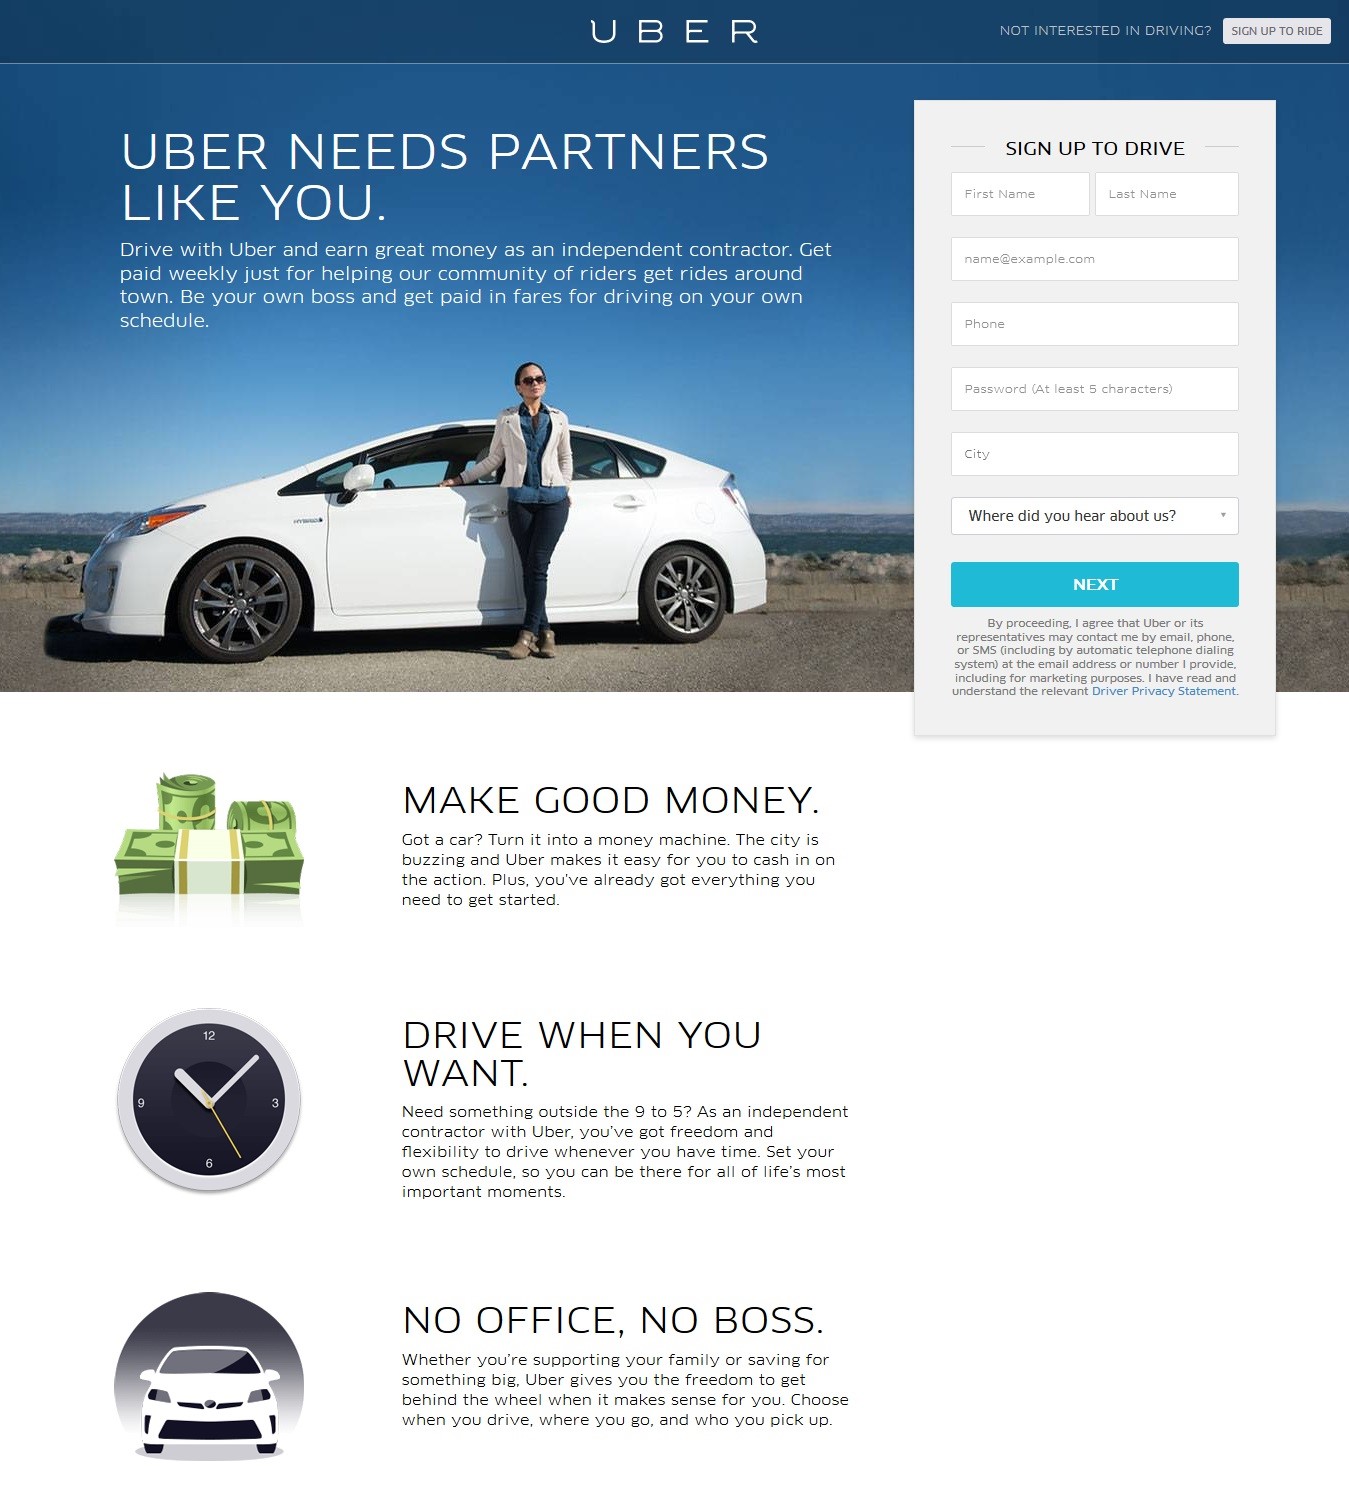 Uber landing page asking you to create an account and give your city and where you heard of Uber.